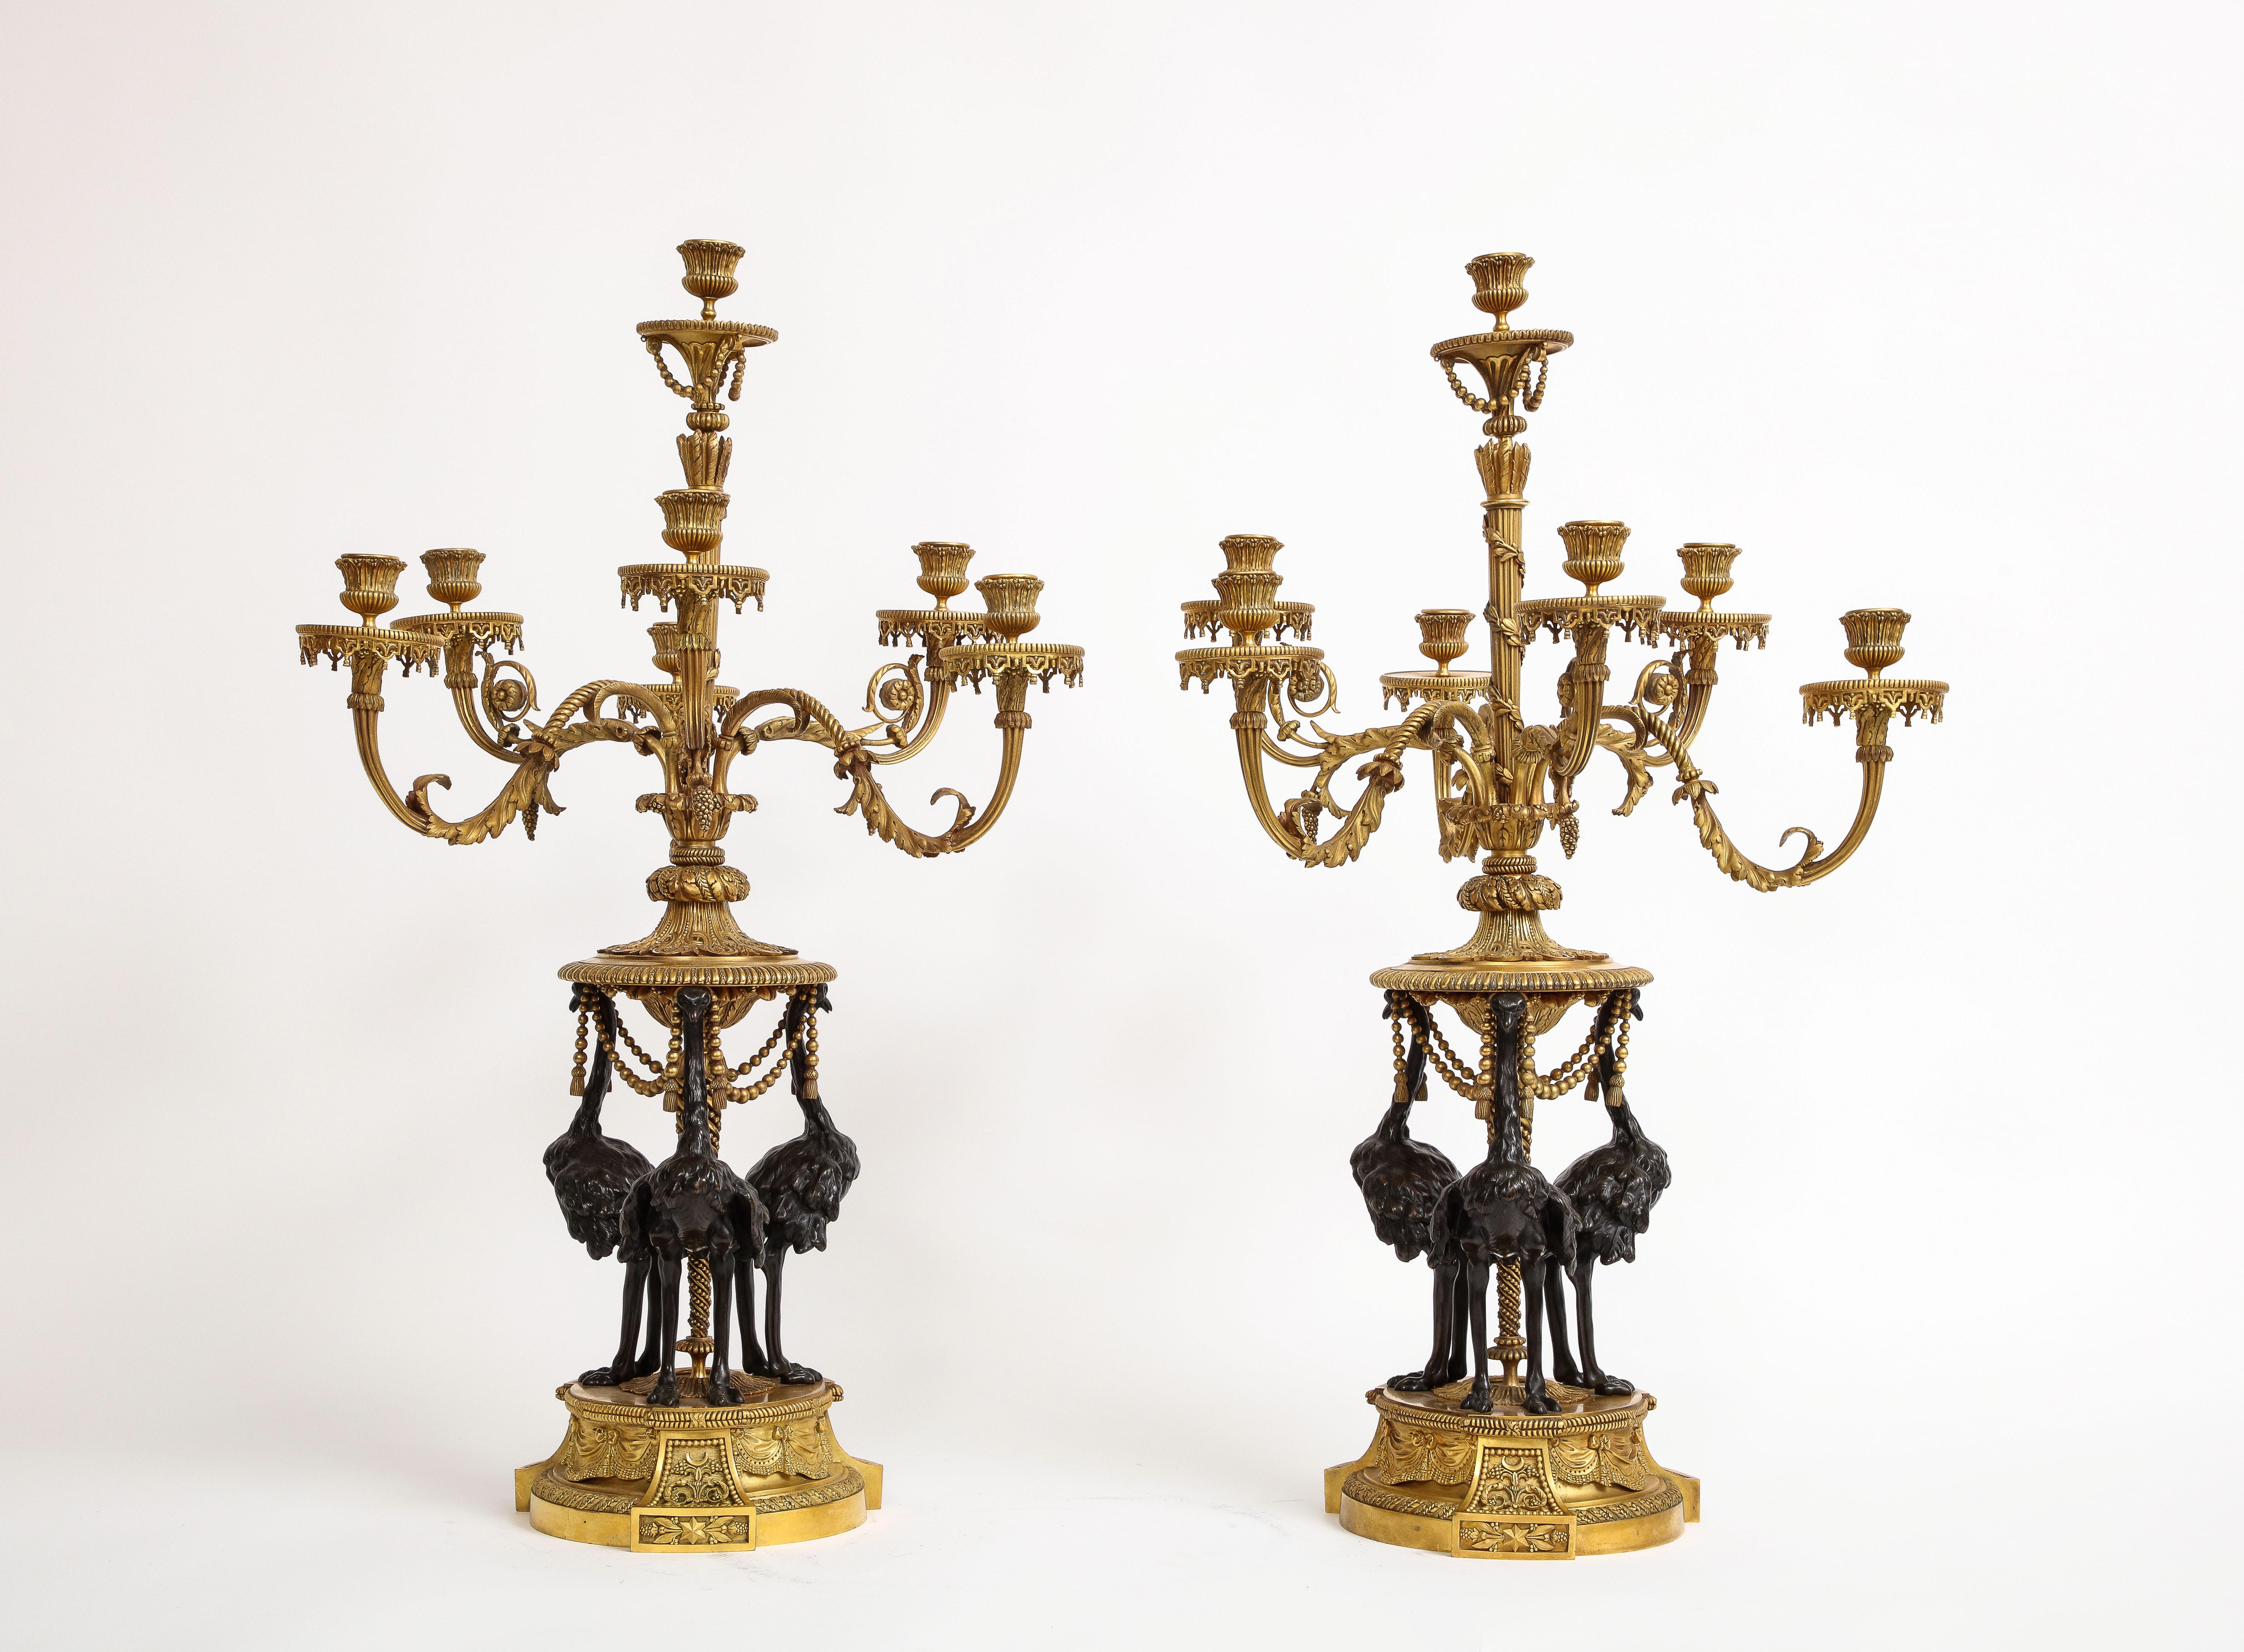 Hand-Carved Pair 19th C. French Louis XVI Ormolu & Patinated 7-Arm Candelabra, A. Beurdeley For Sale